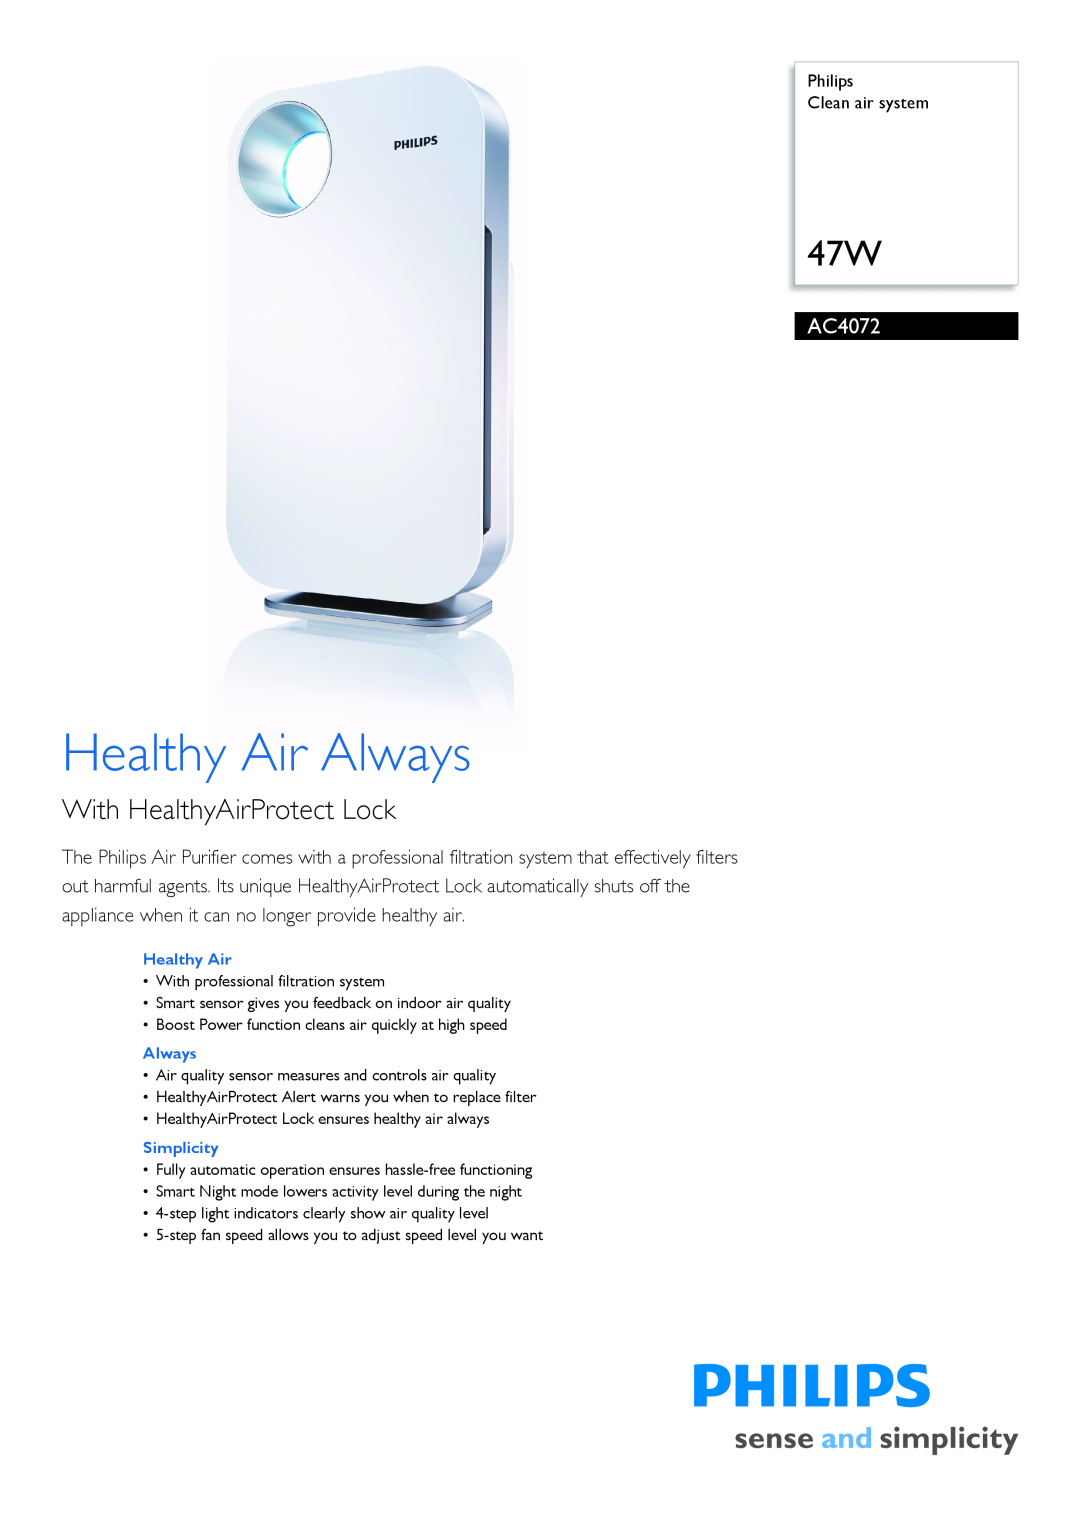 Philips AC4072/00 manual Philips Clean air system, Simplicity, Healthy Air Always, With HealthyAirProtect Lock 